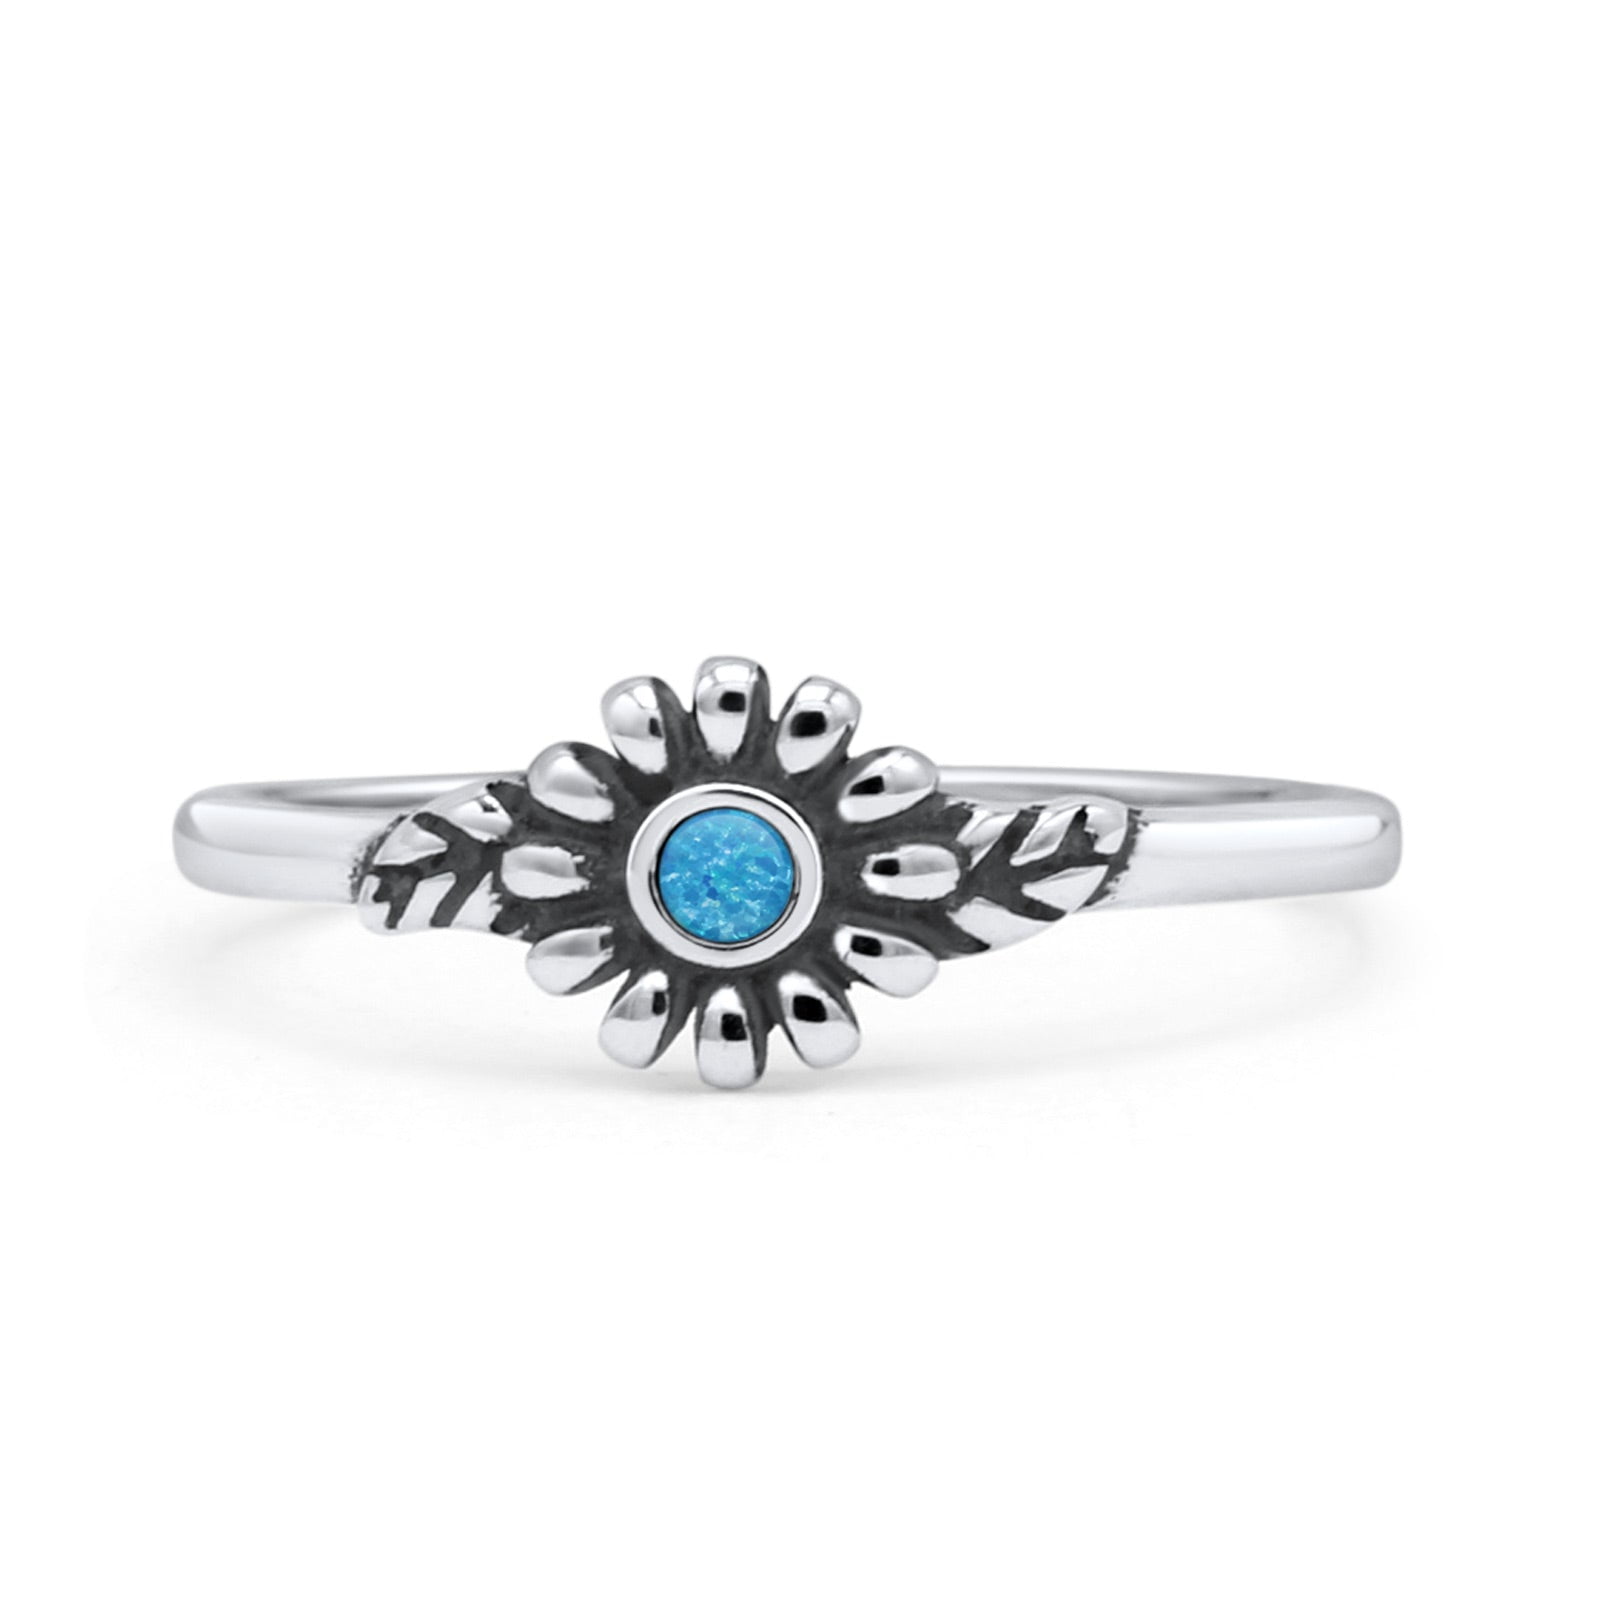 Flower Oxidized Ring Band Lab Opal 925 Sterling Silver Size 8 - Walmart.com